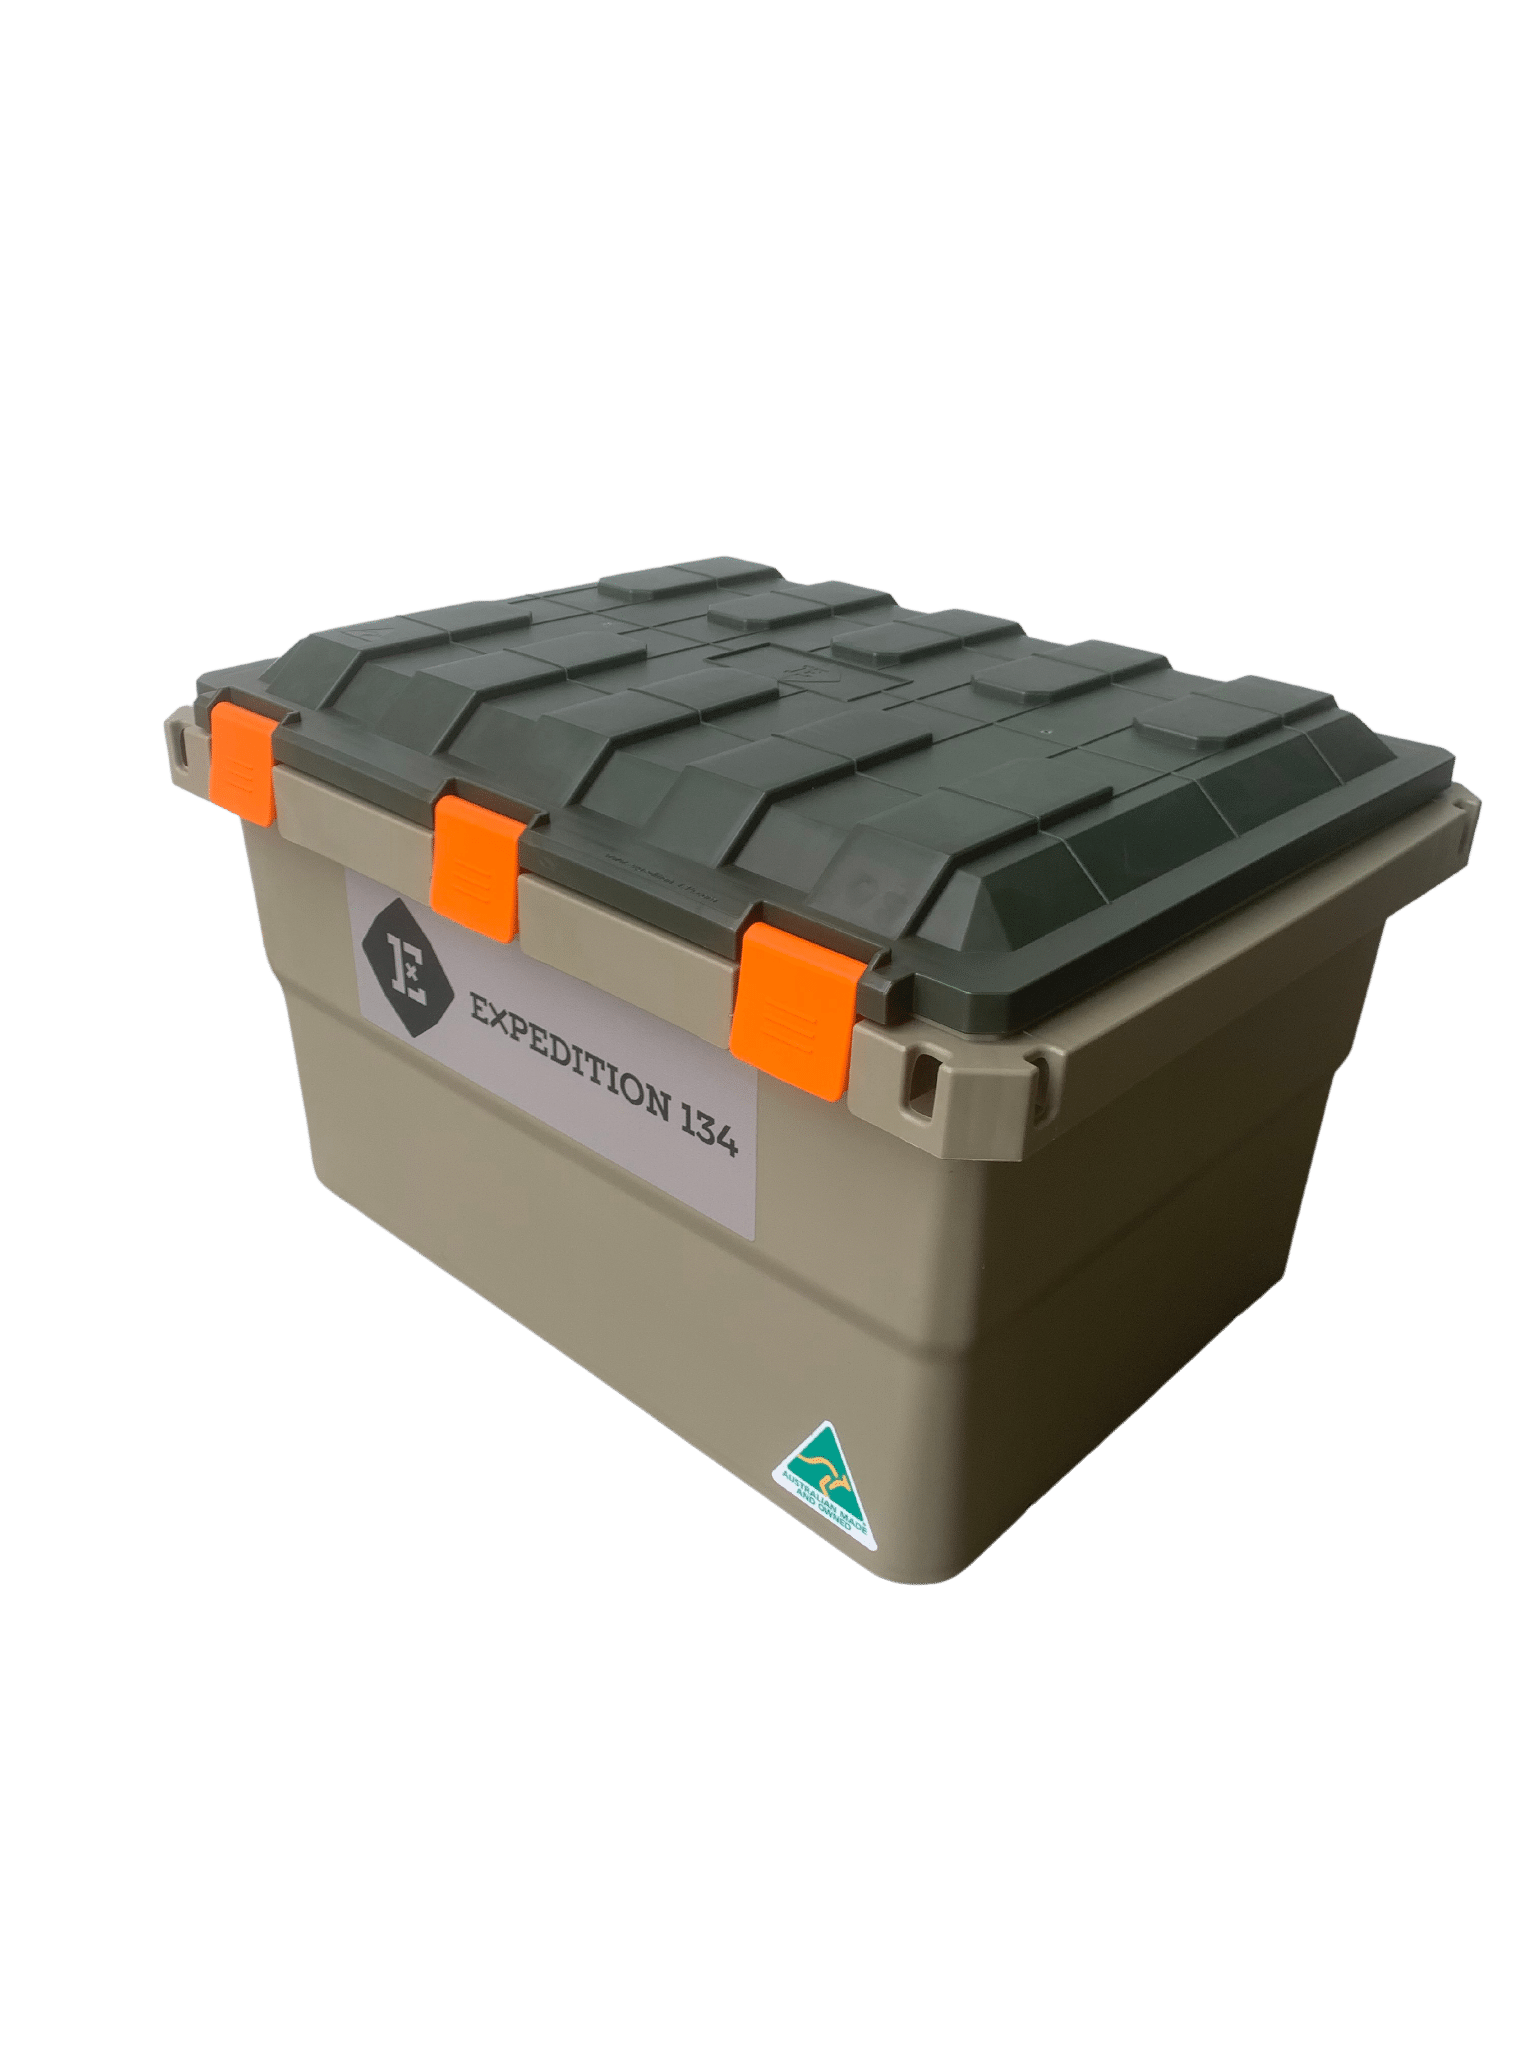 Hunters Collection - Expedition 134 - Limited Edition Expedition 134 colour for Hunting using Khaki body Military Green Lid and Fire Orange latches.